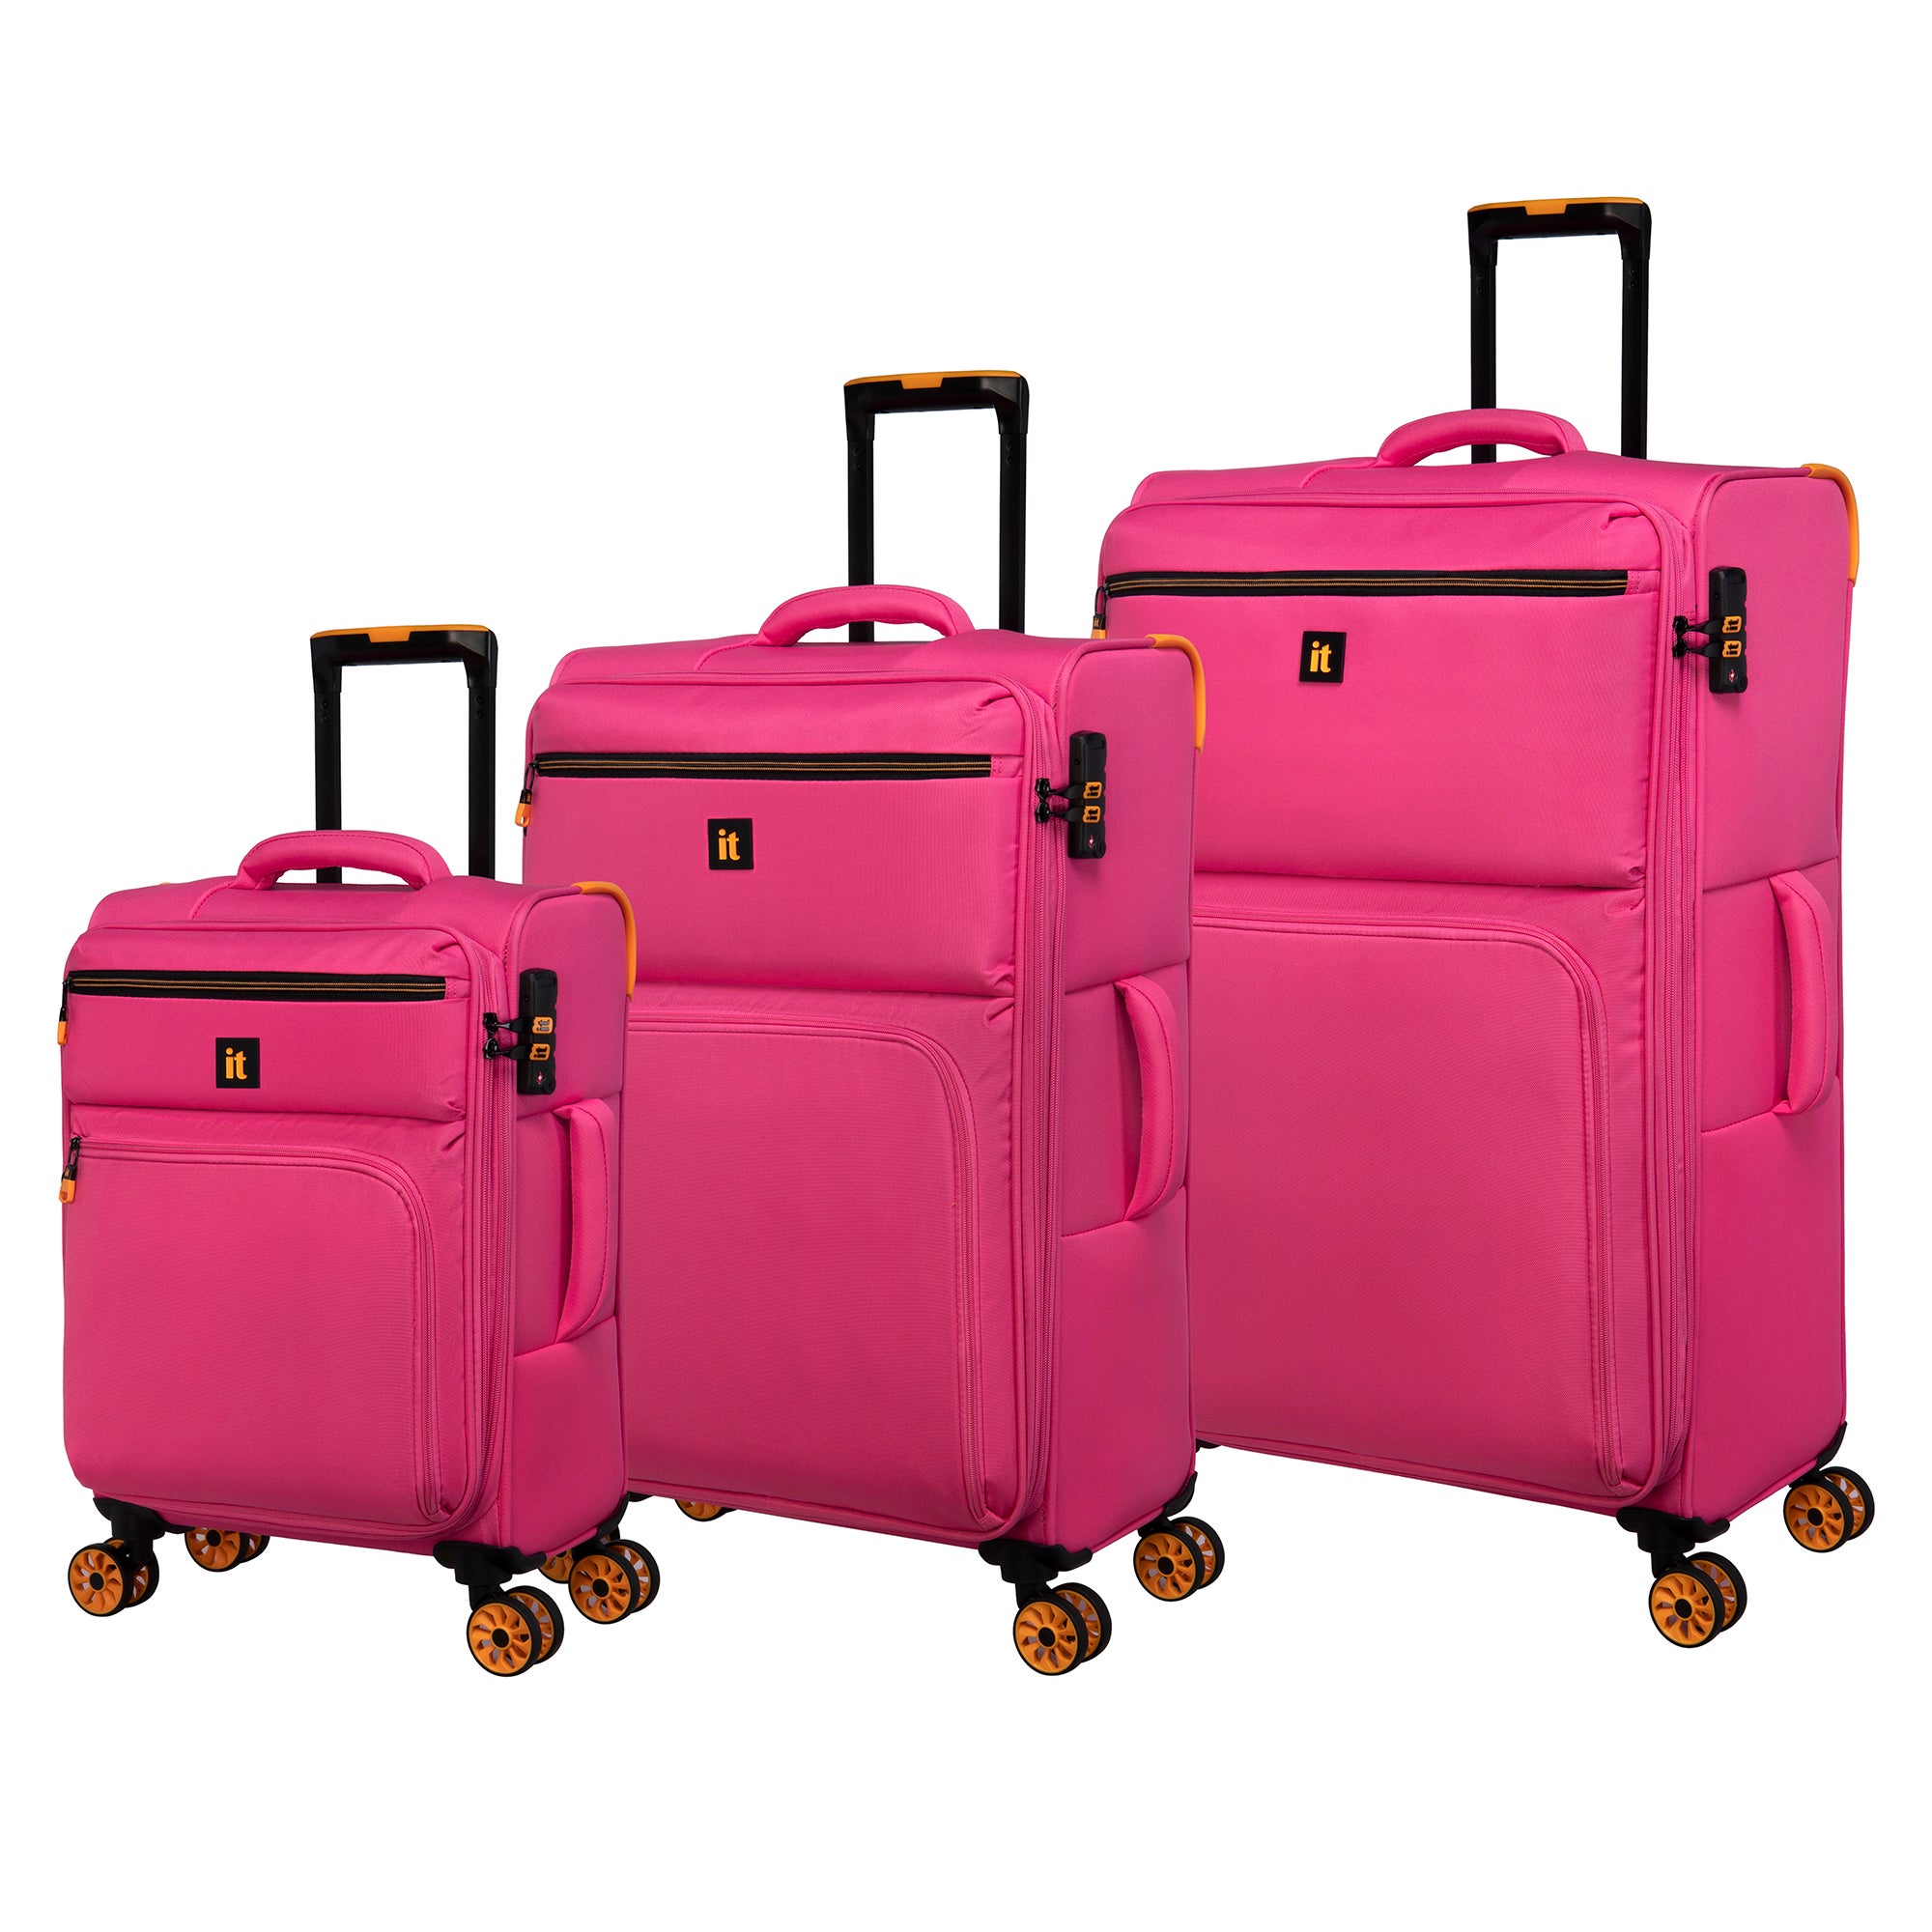 IT Luggage Compartment Soft Shell 3 Piece Suitcase Set